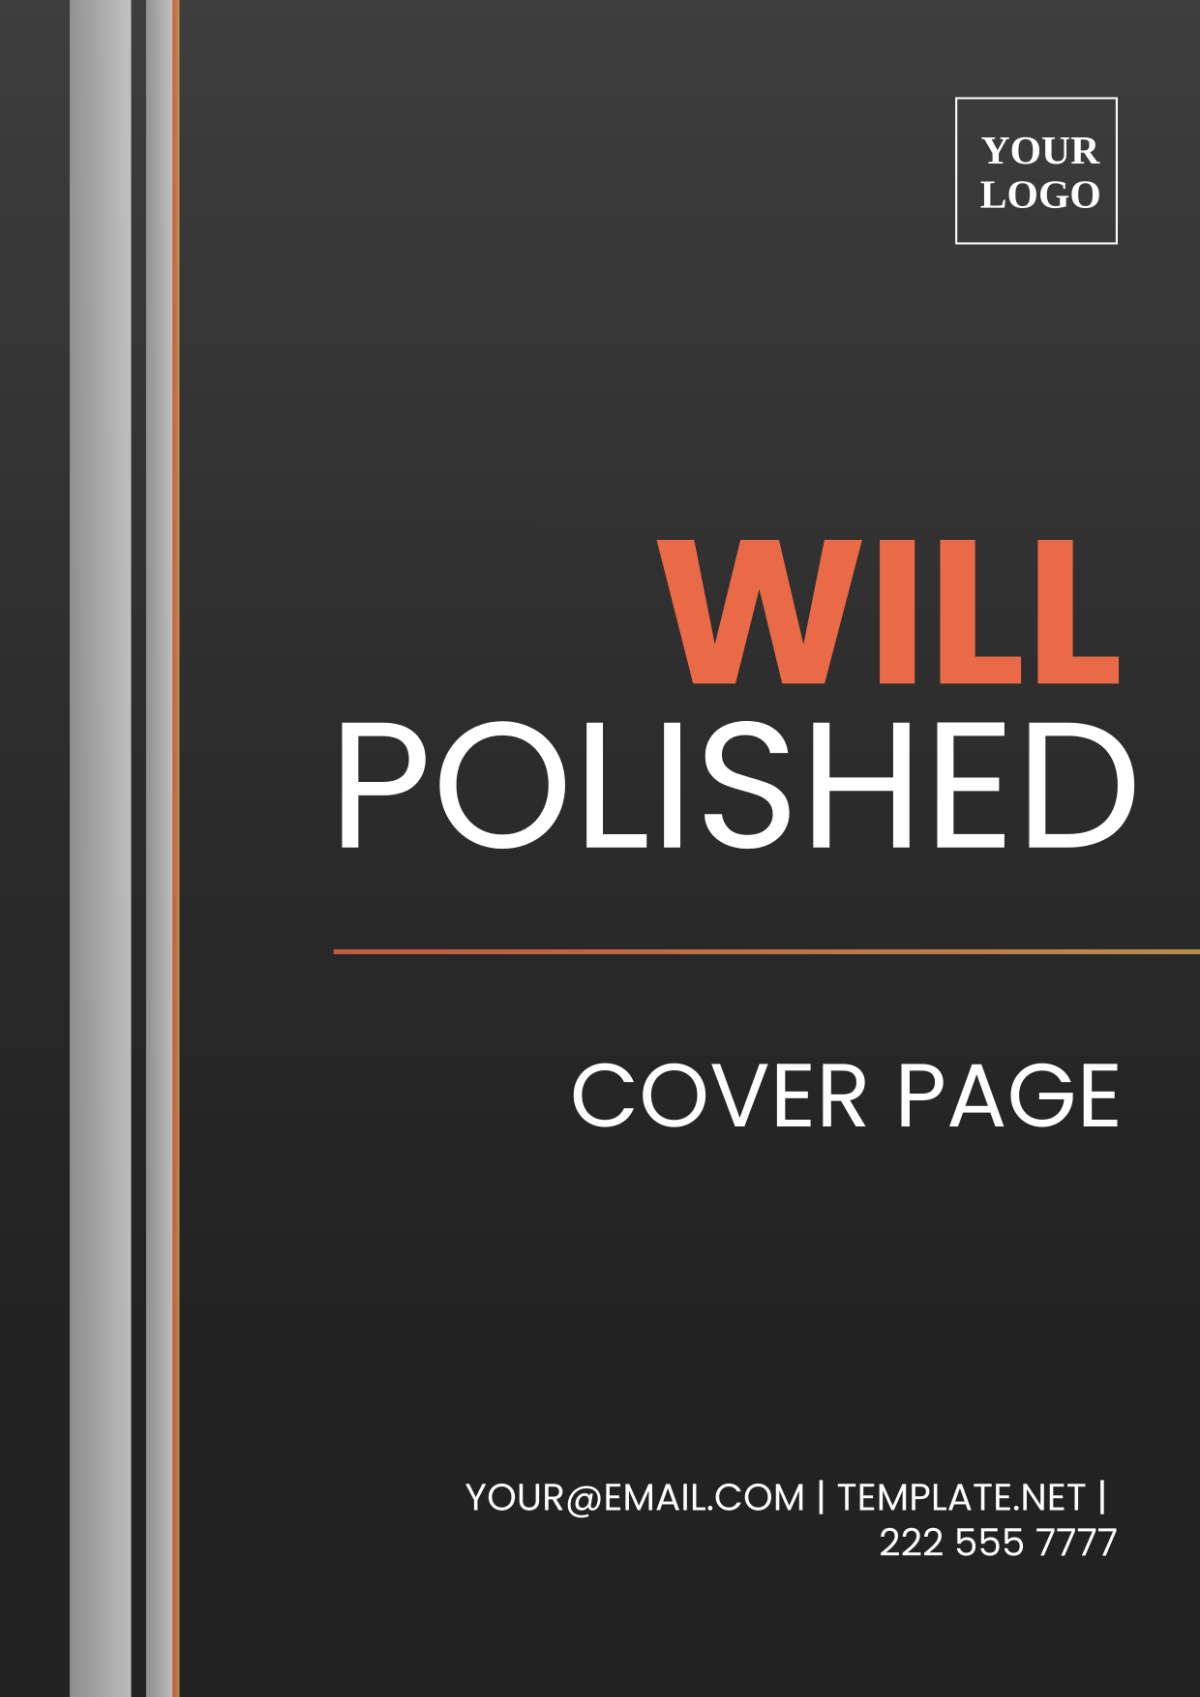 Will Polished Cover Page